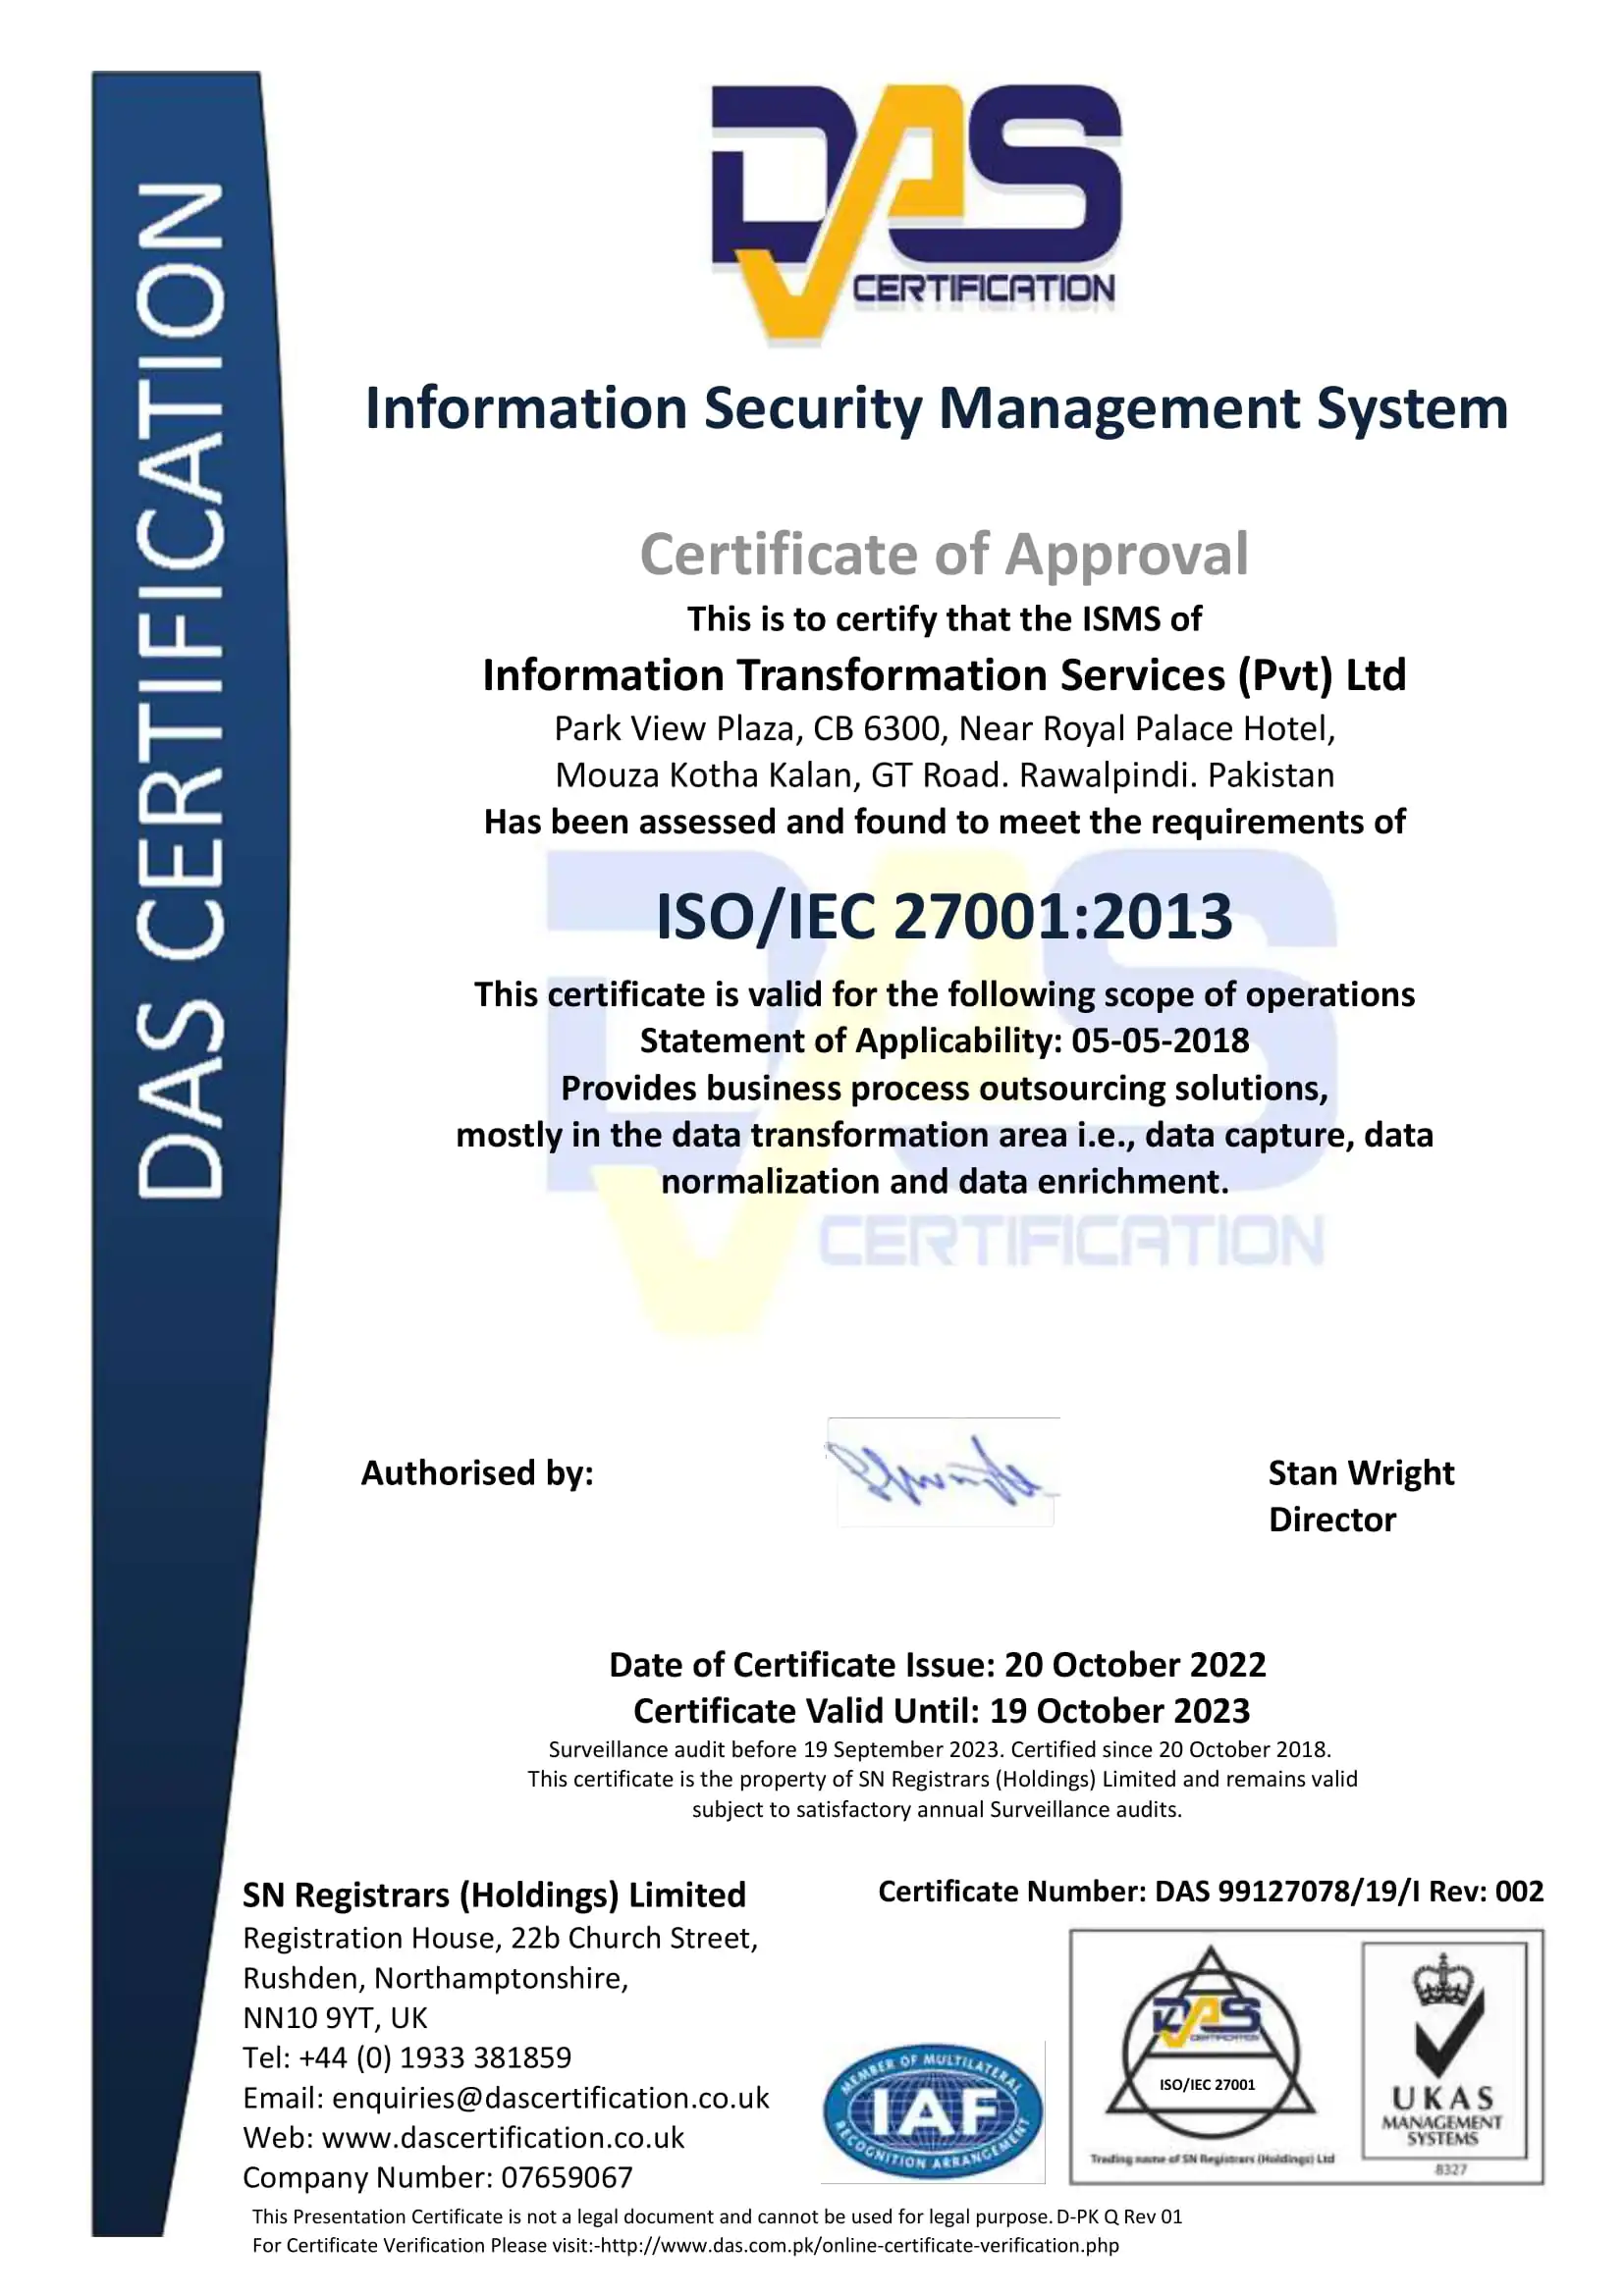 ITS ISO Certificate